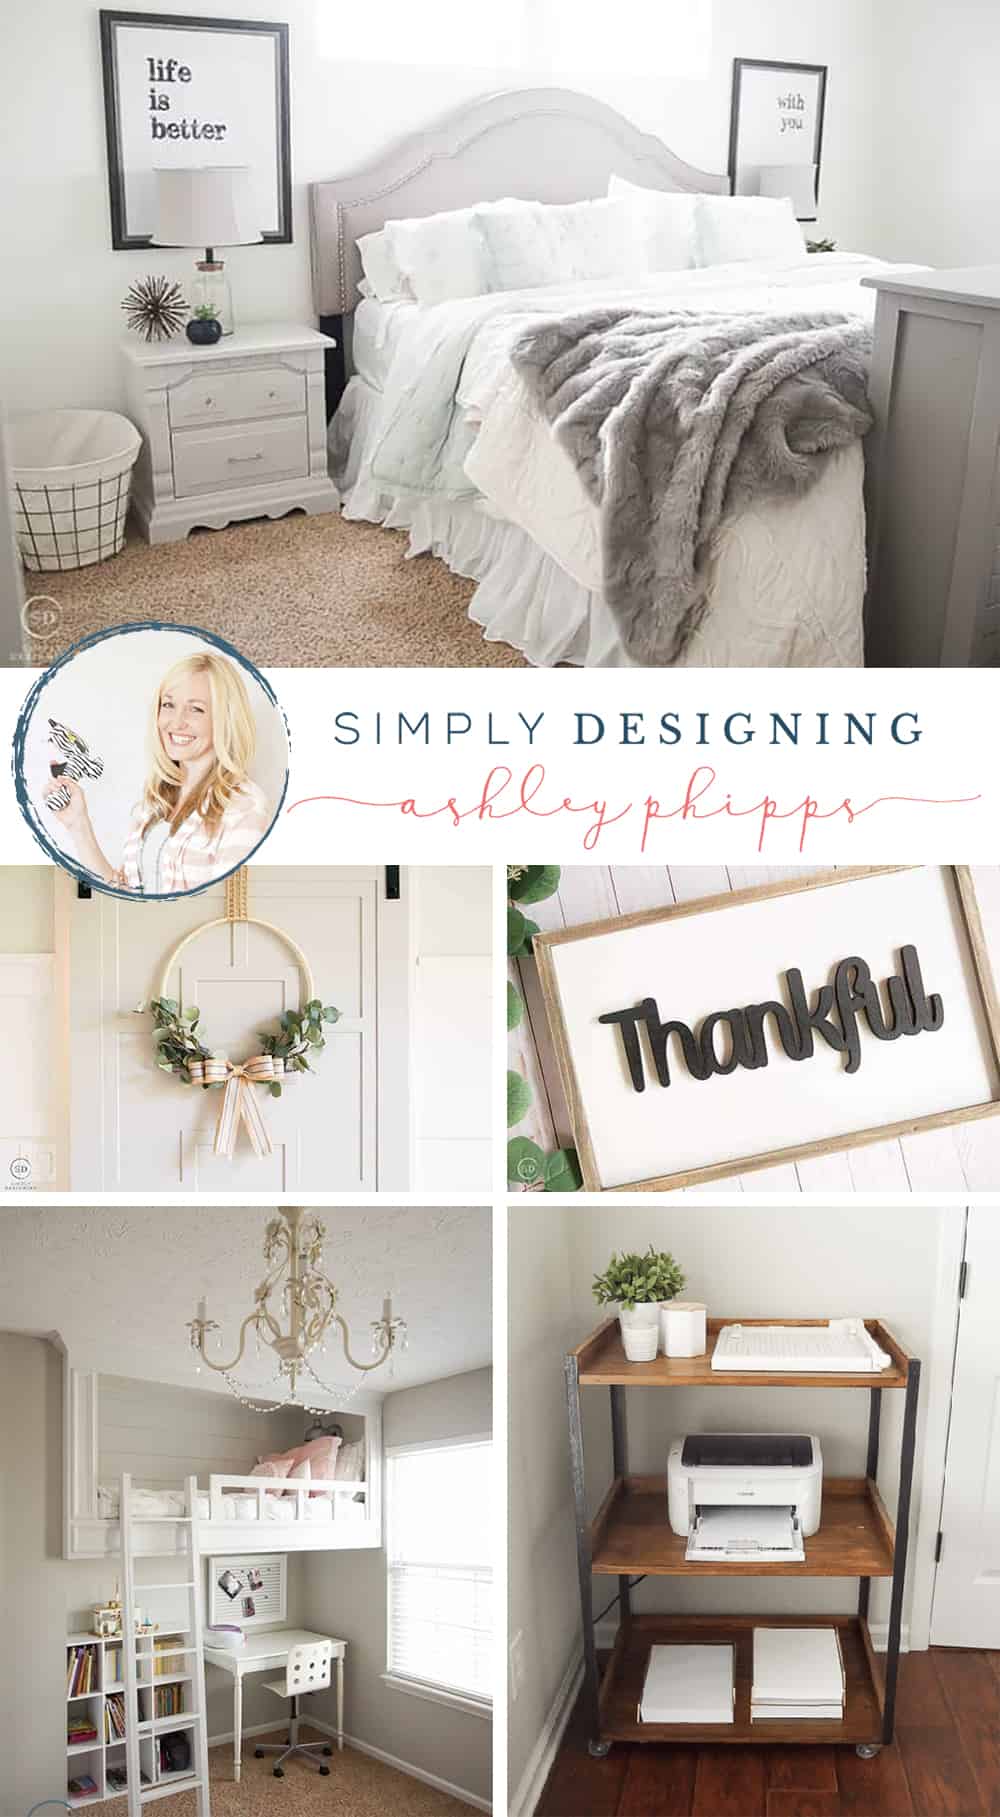 SimplyDesigning AshleyPhipps | 45 Light Bright and Beautiful Home Inspiration Ideas | 28 | Farmhouse Fall Centerpiece